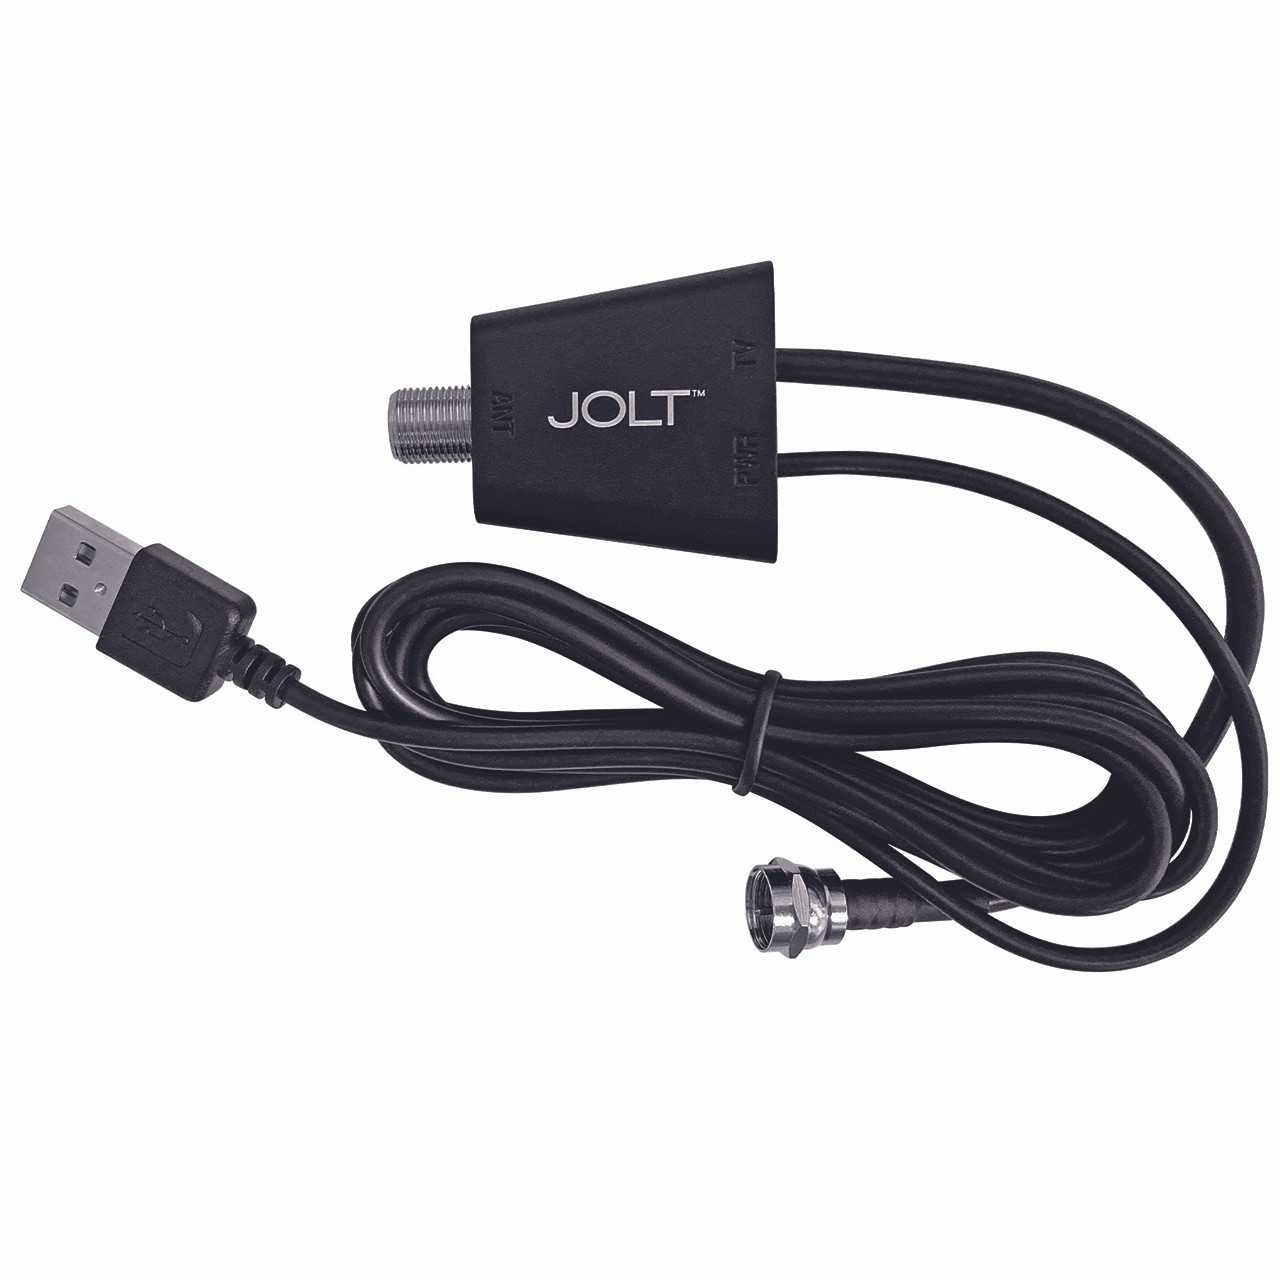 Jolt Switch USB In-Line Amplifier and Power Adapter